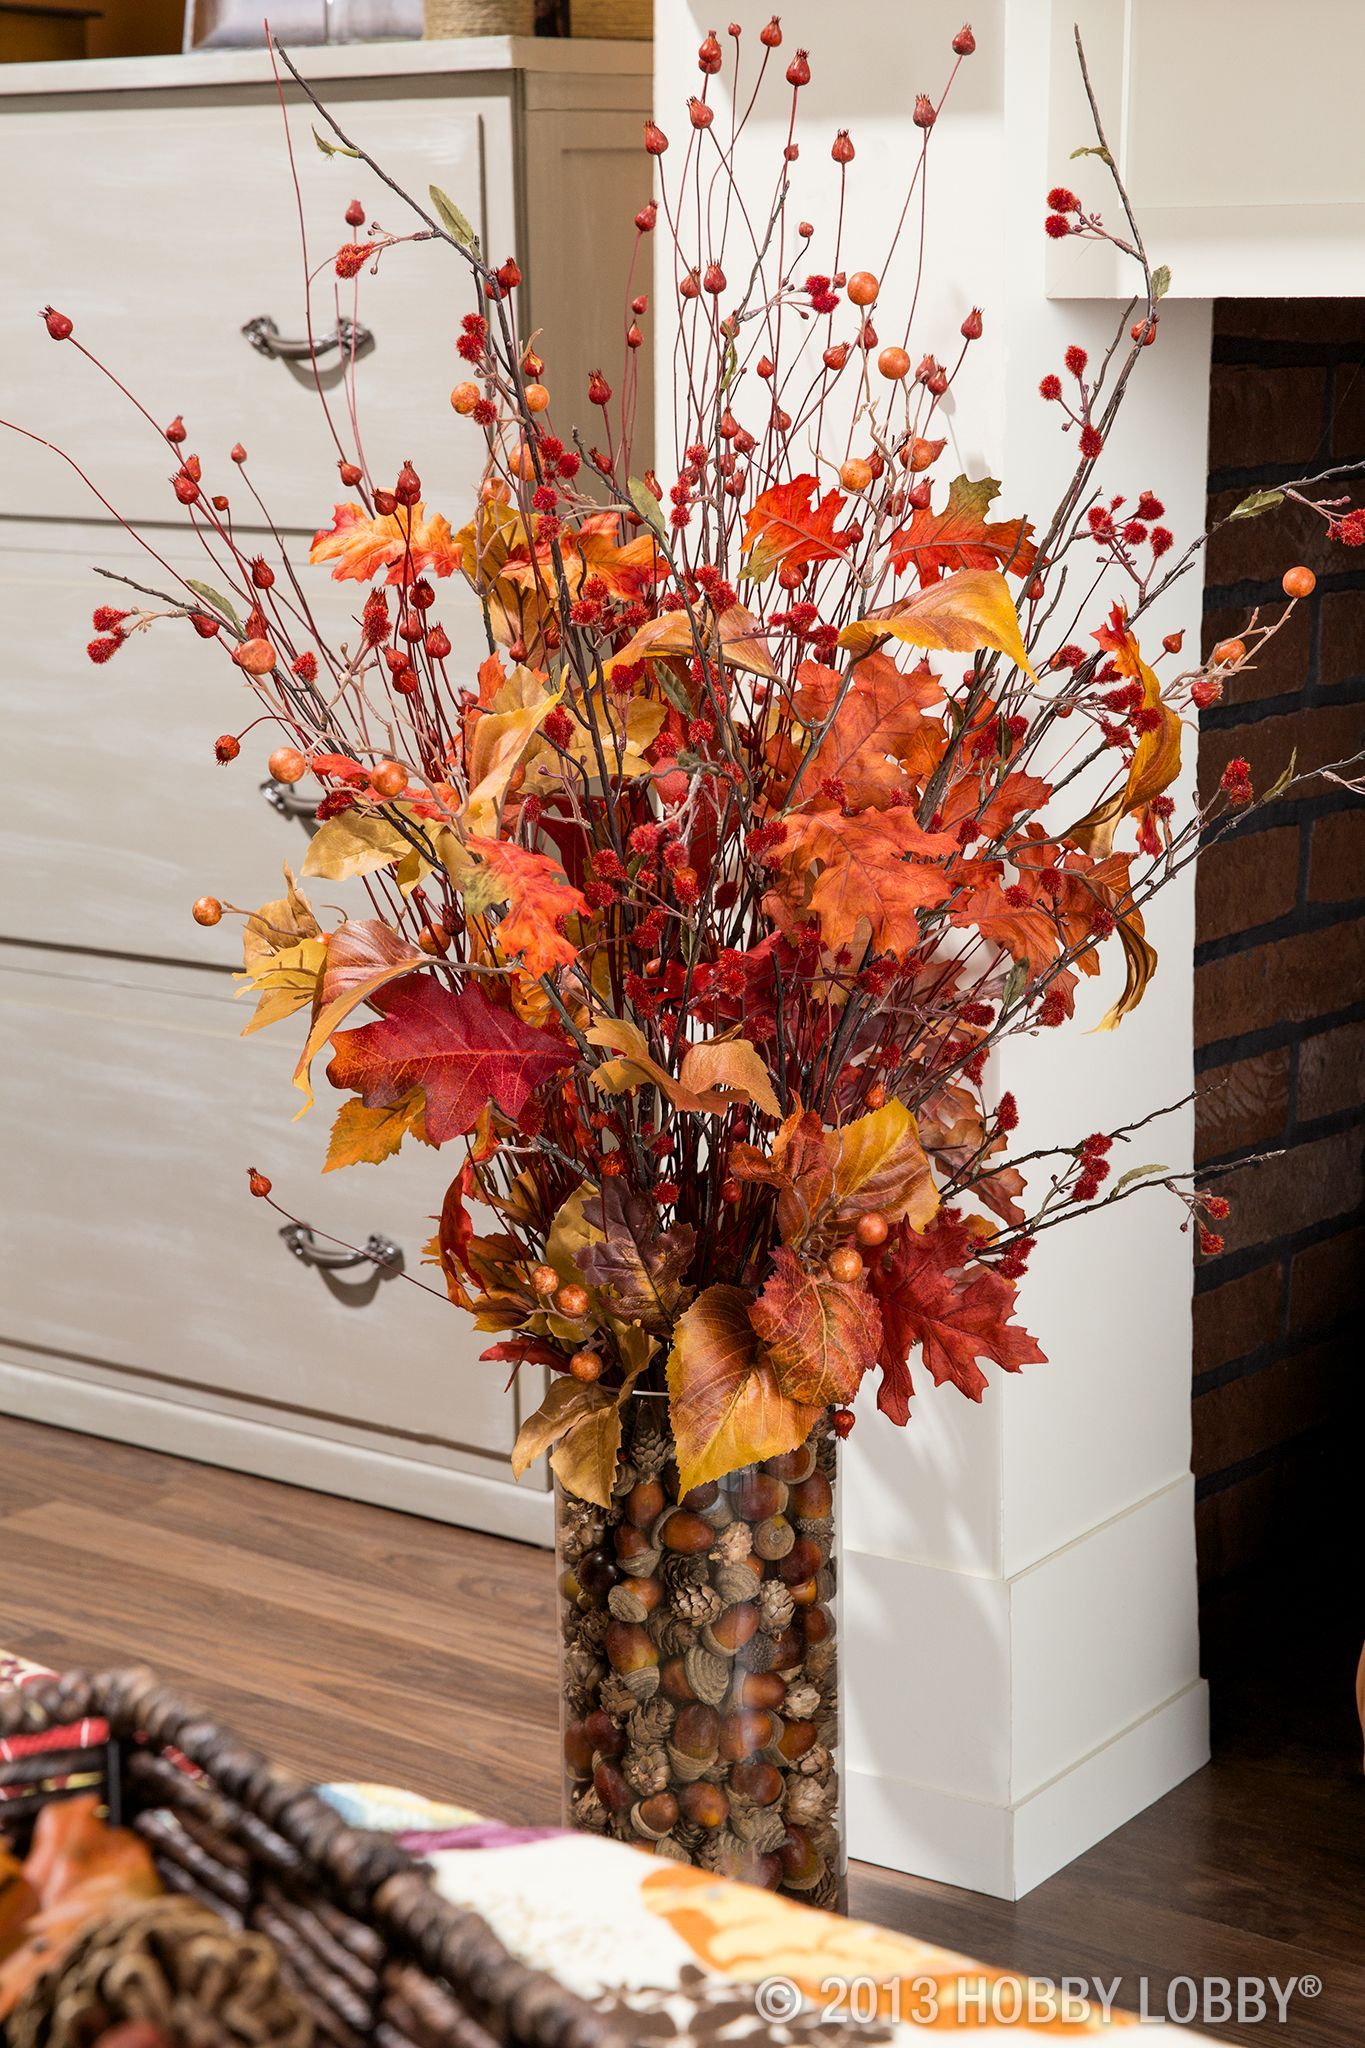 Use faux-floral stems for a flower arrangement that will last all the way through the chilly days of Fall and Winter and straight